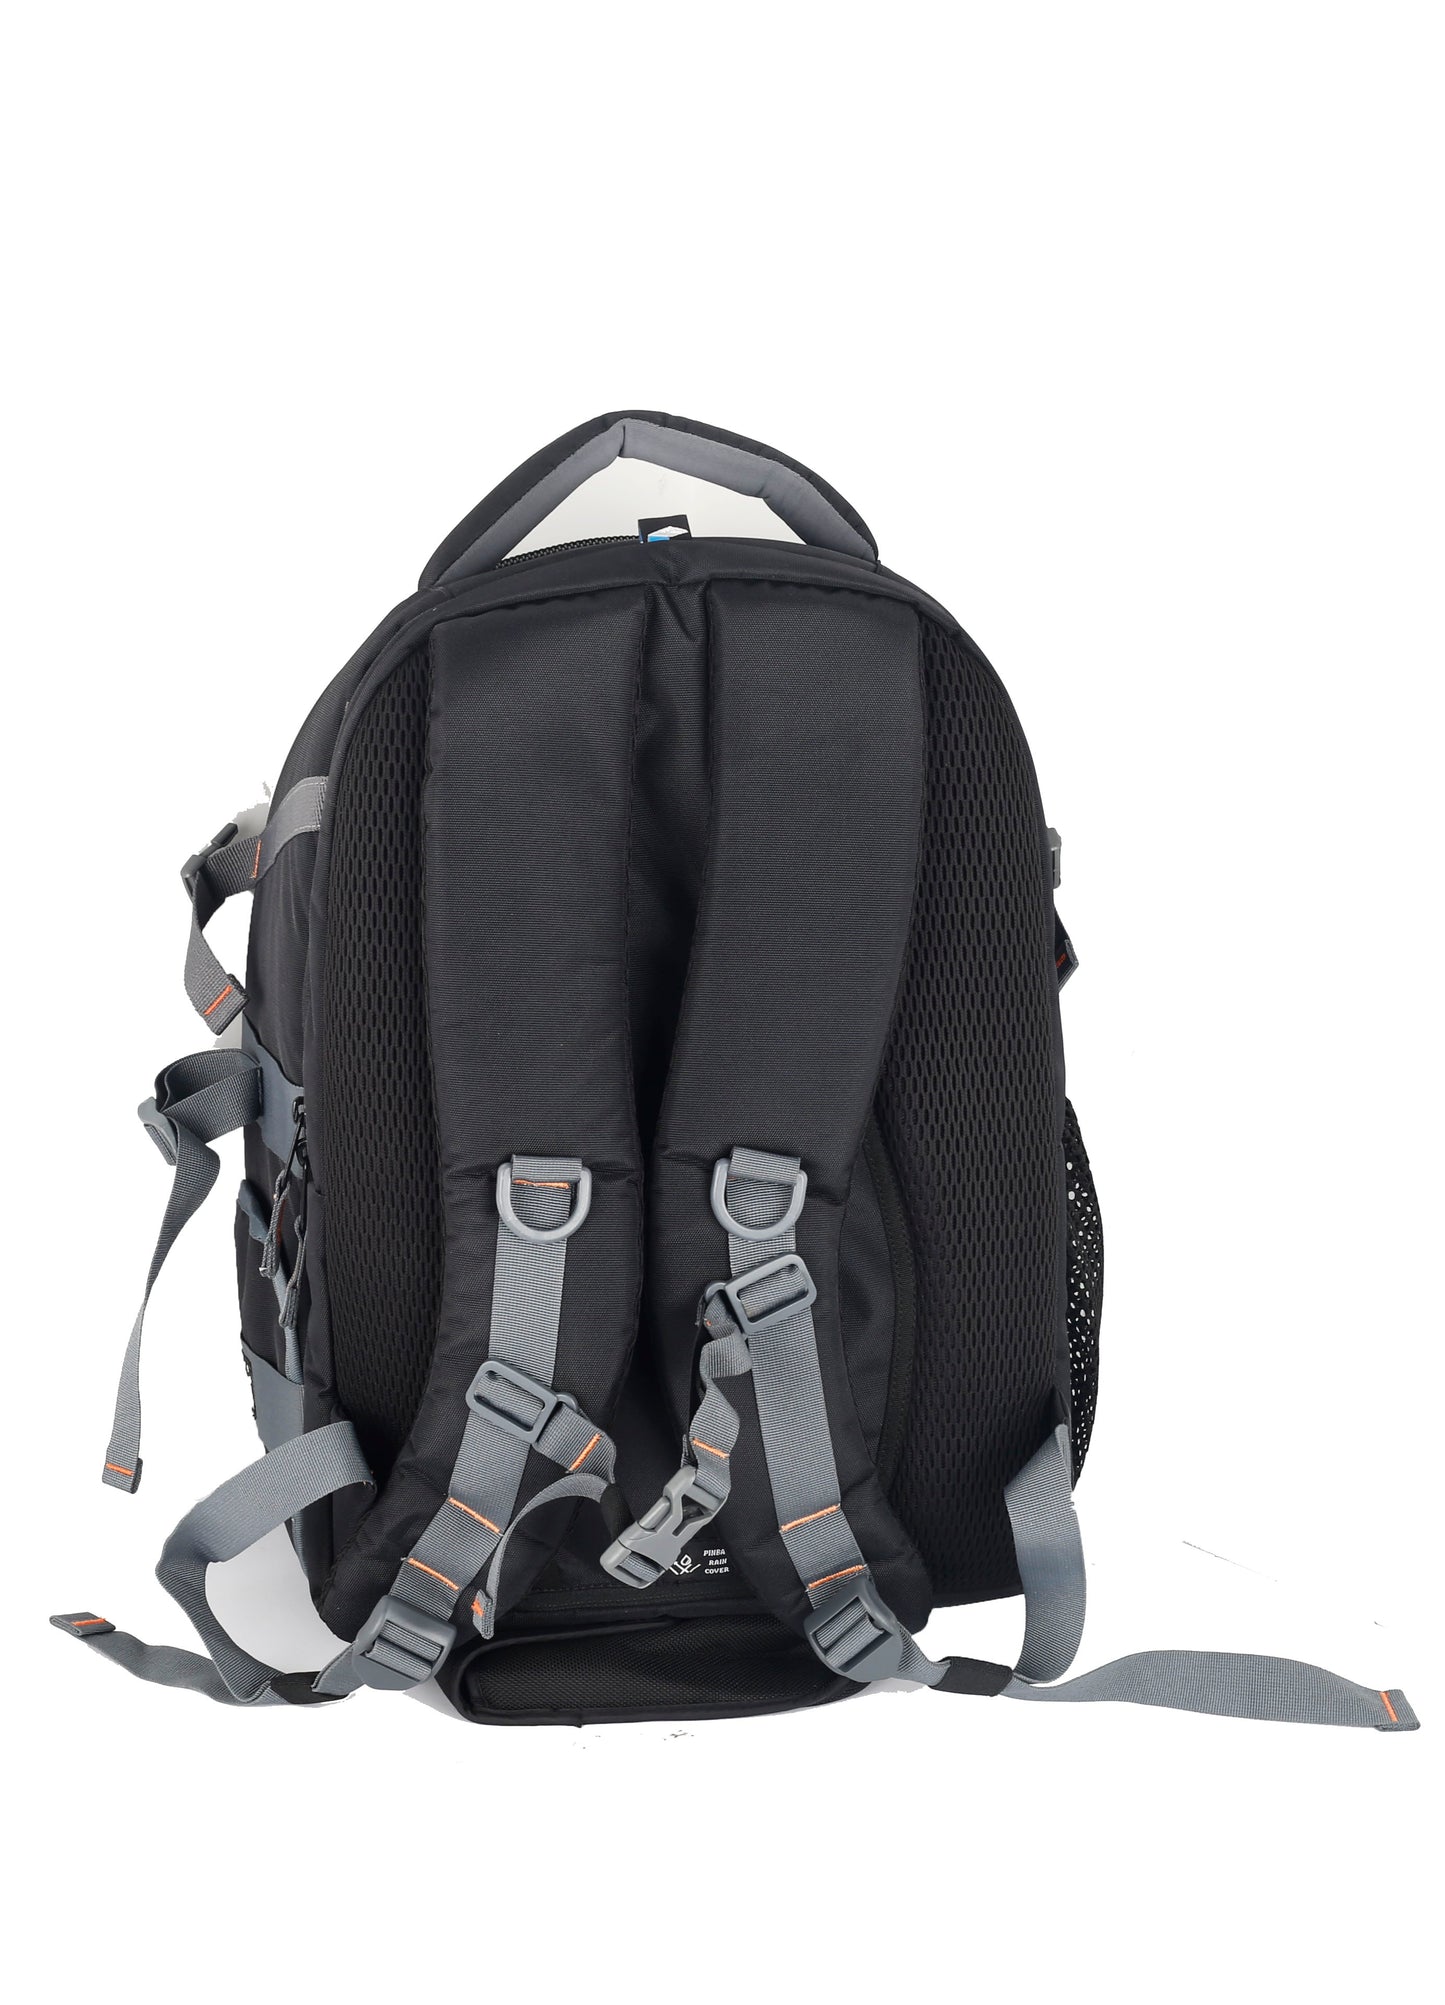 Image: Back view of the P33 Sniper DSLR camera backpack, showcasing its ergonomic design with padded shoulder straps and a breathable back panel for comfortable carrying. The backpack's adjustable sternum strap provides added support and stability. The back also features a dedicated laptop compartment for secure storage and convenient access. Experience comfort and convenience on your photography journeys with the P33 Sniper.